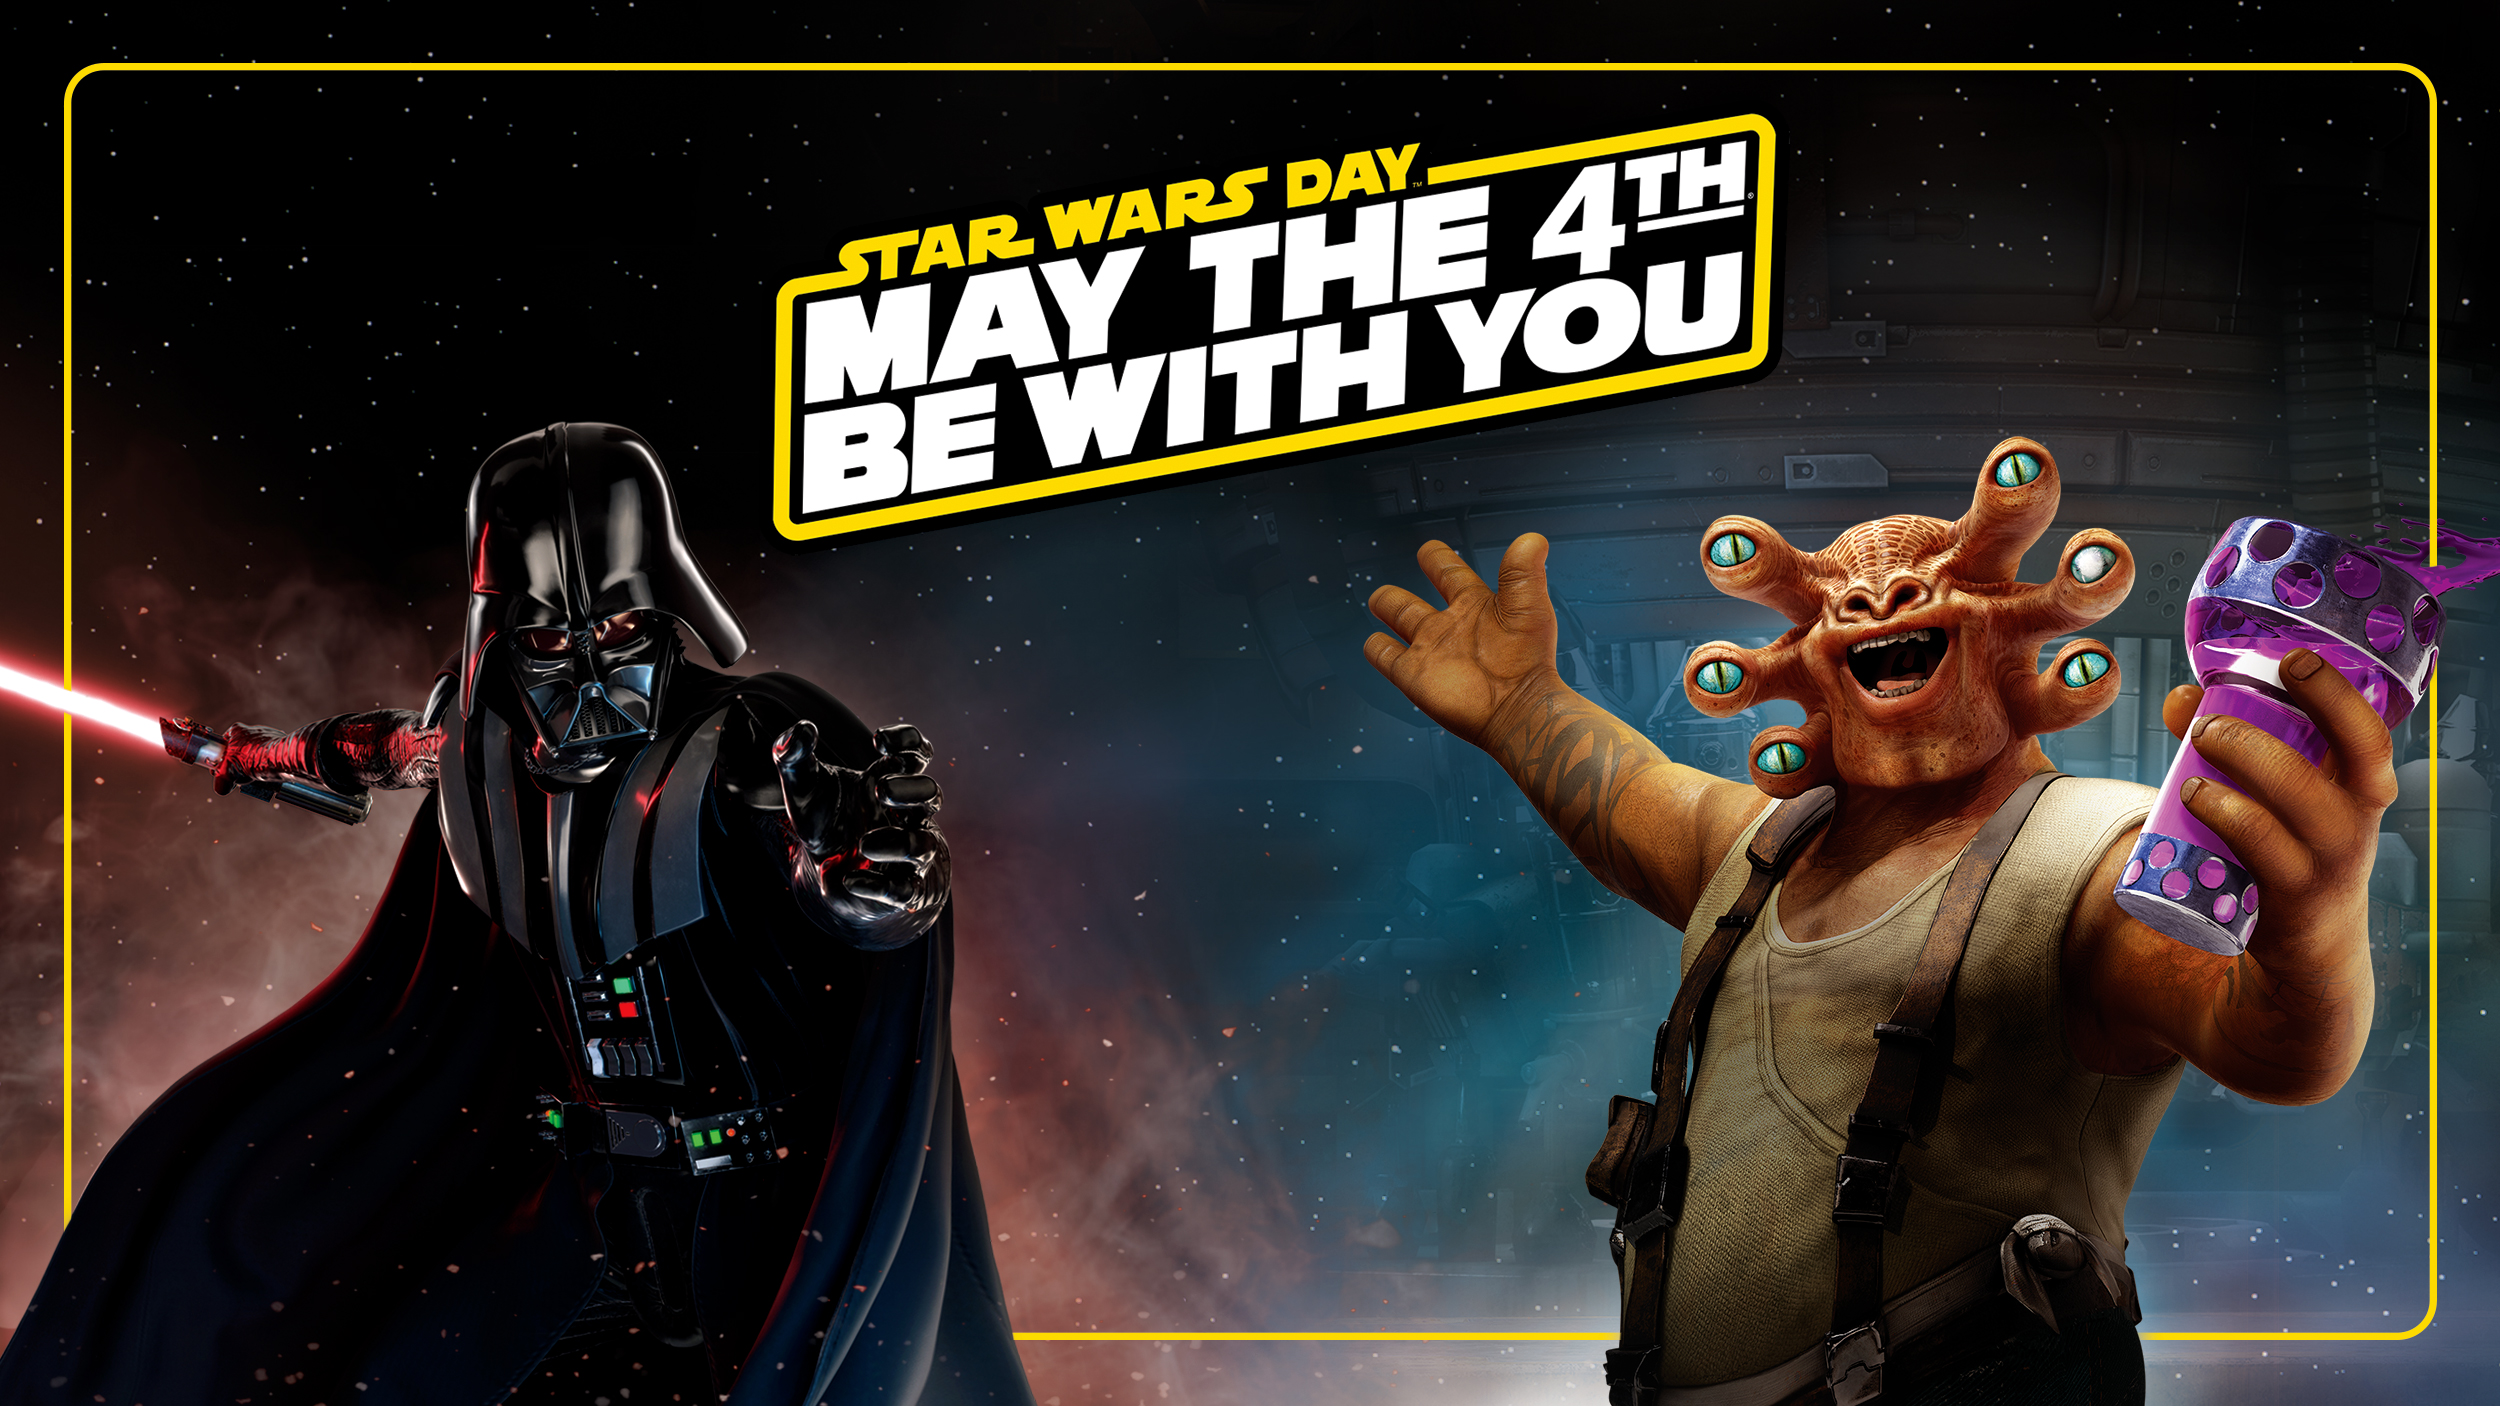 Our Journeys in a Galaxy Far, Far Away: May the 4th Be With You 2022